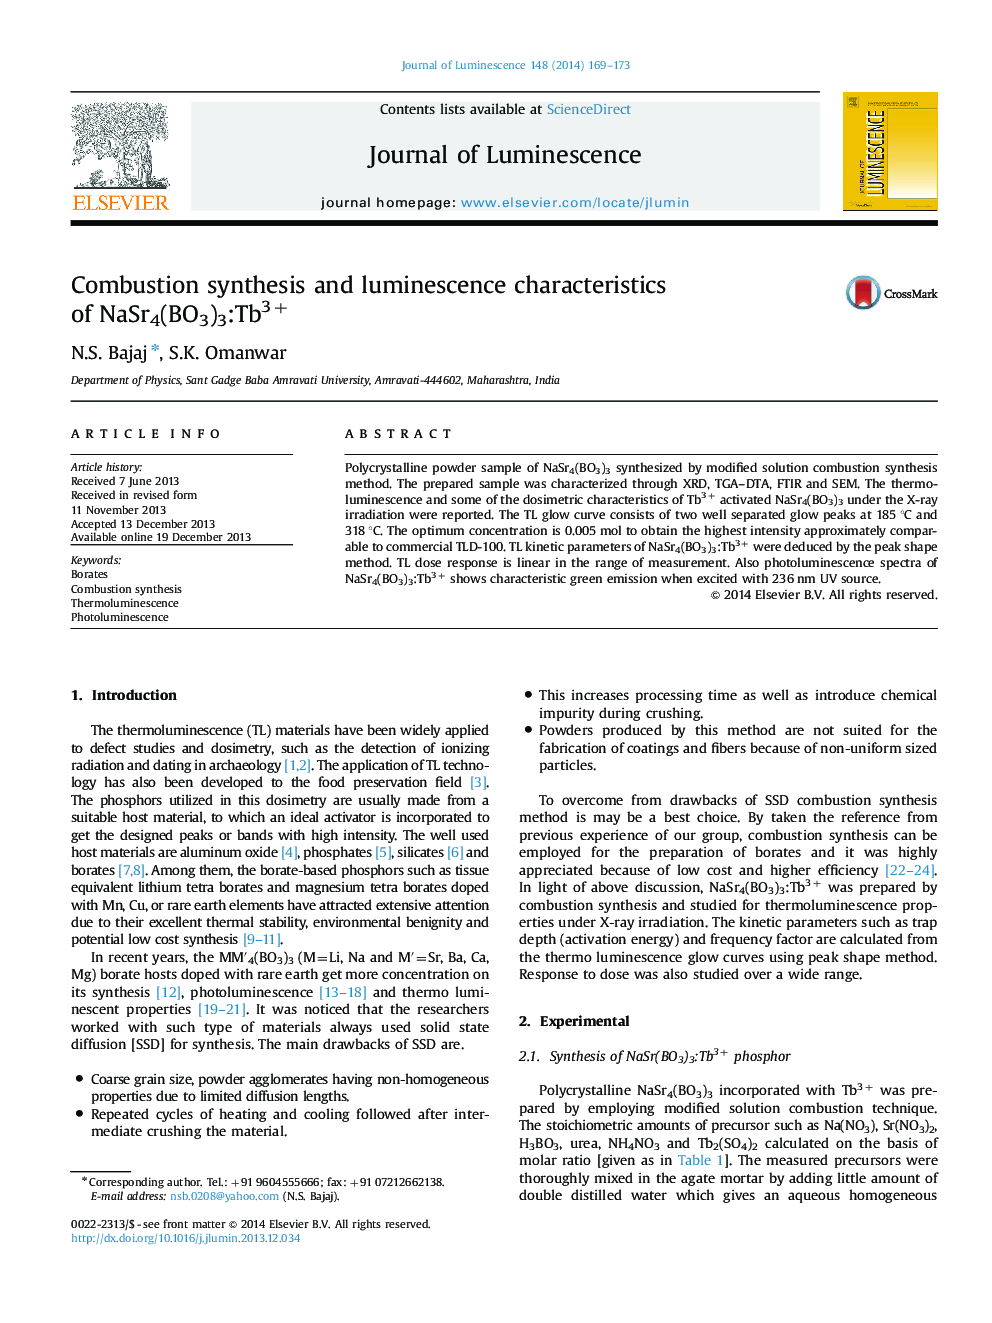 Combustion synthesis and luminescence characteristics of NaSr4(BO3)3:Tb3+